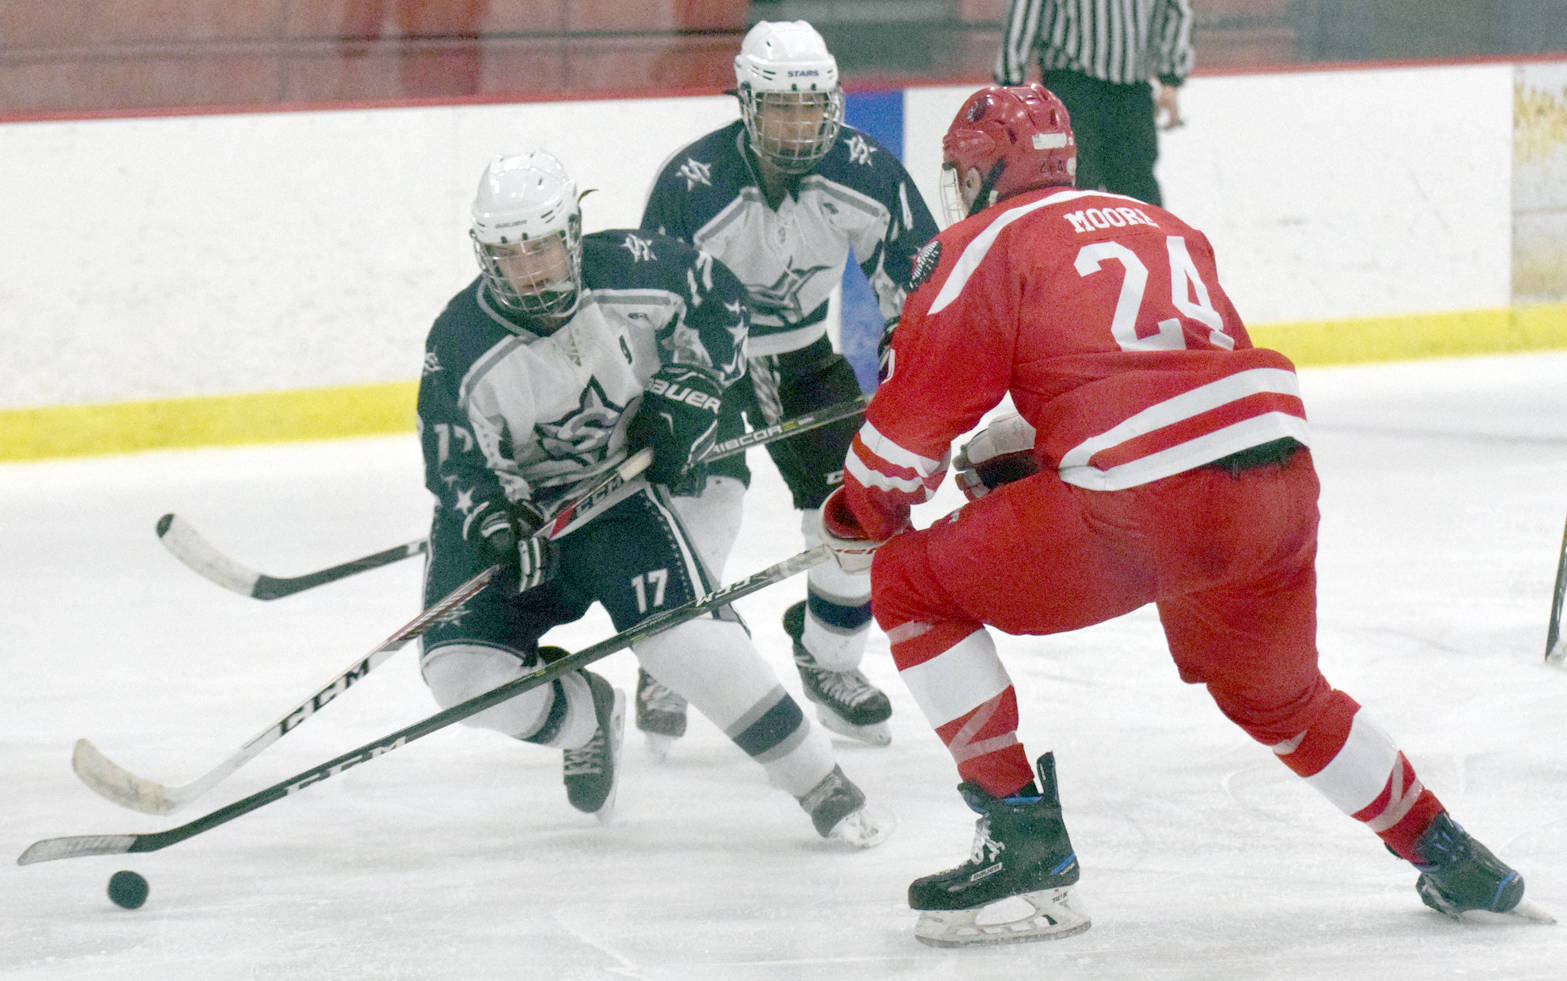 Soldotna’s Wyatt Medcoff attacks Wasilla’s Wyatt Moore while Soldotna’s Alex Montague supports the puck Friday, Dec. 1, 2017, at the Soldotna Regional Sports Complex. (Photo by Jeff Helminiak/Peninsula Clarion)